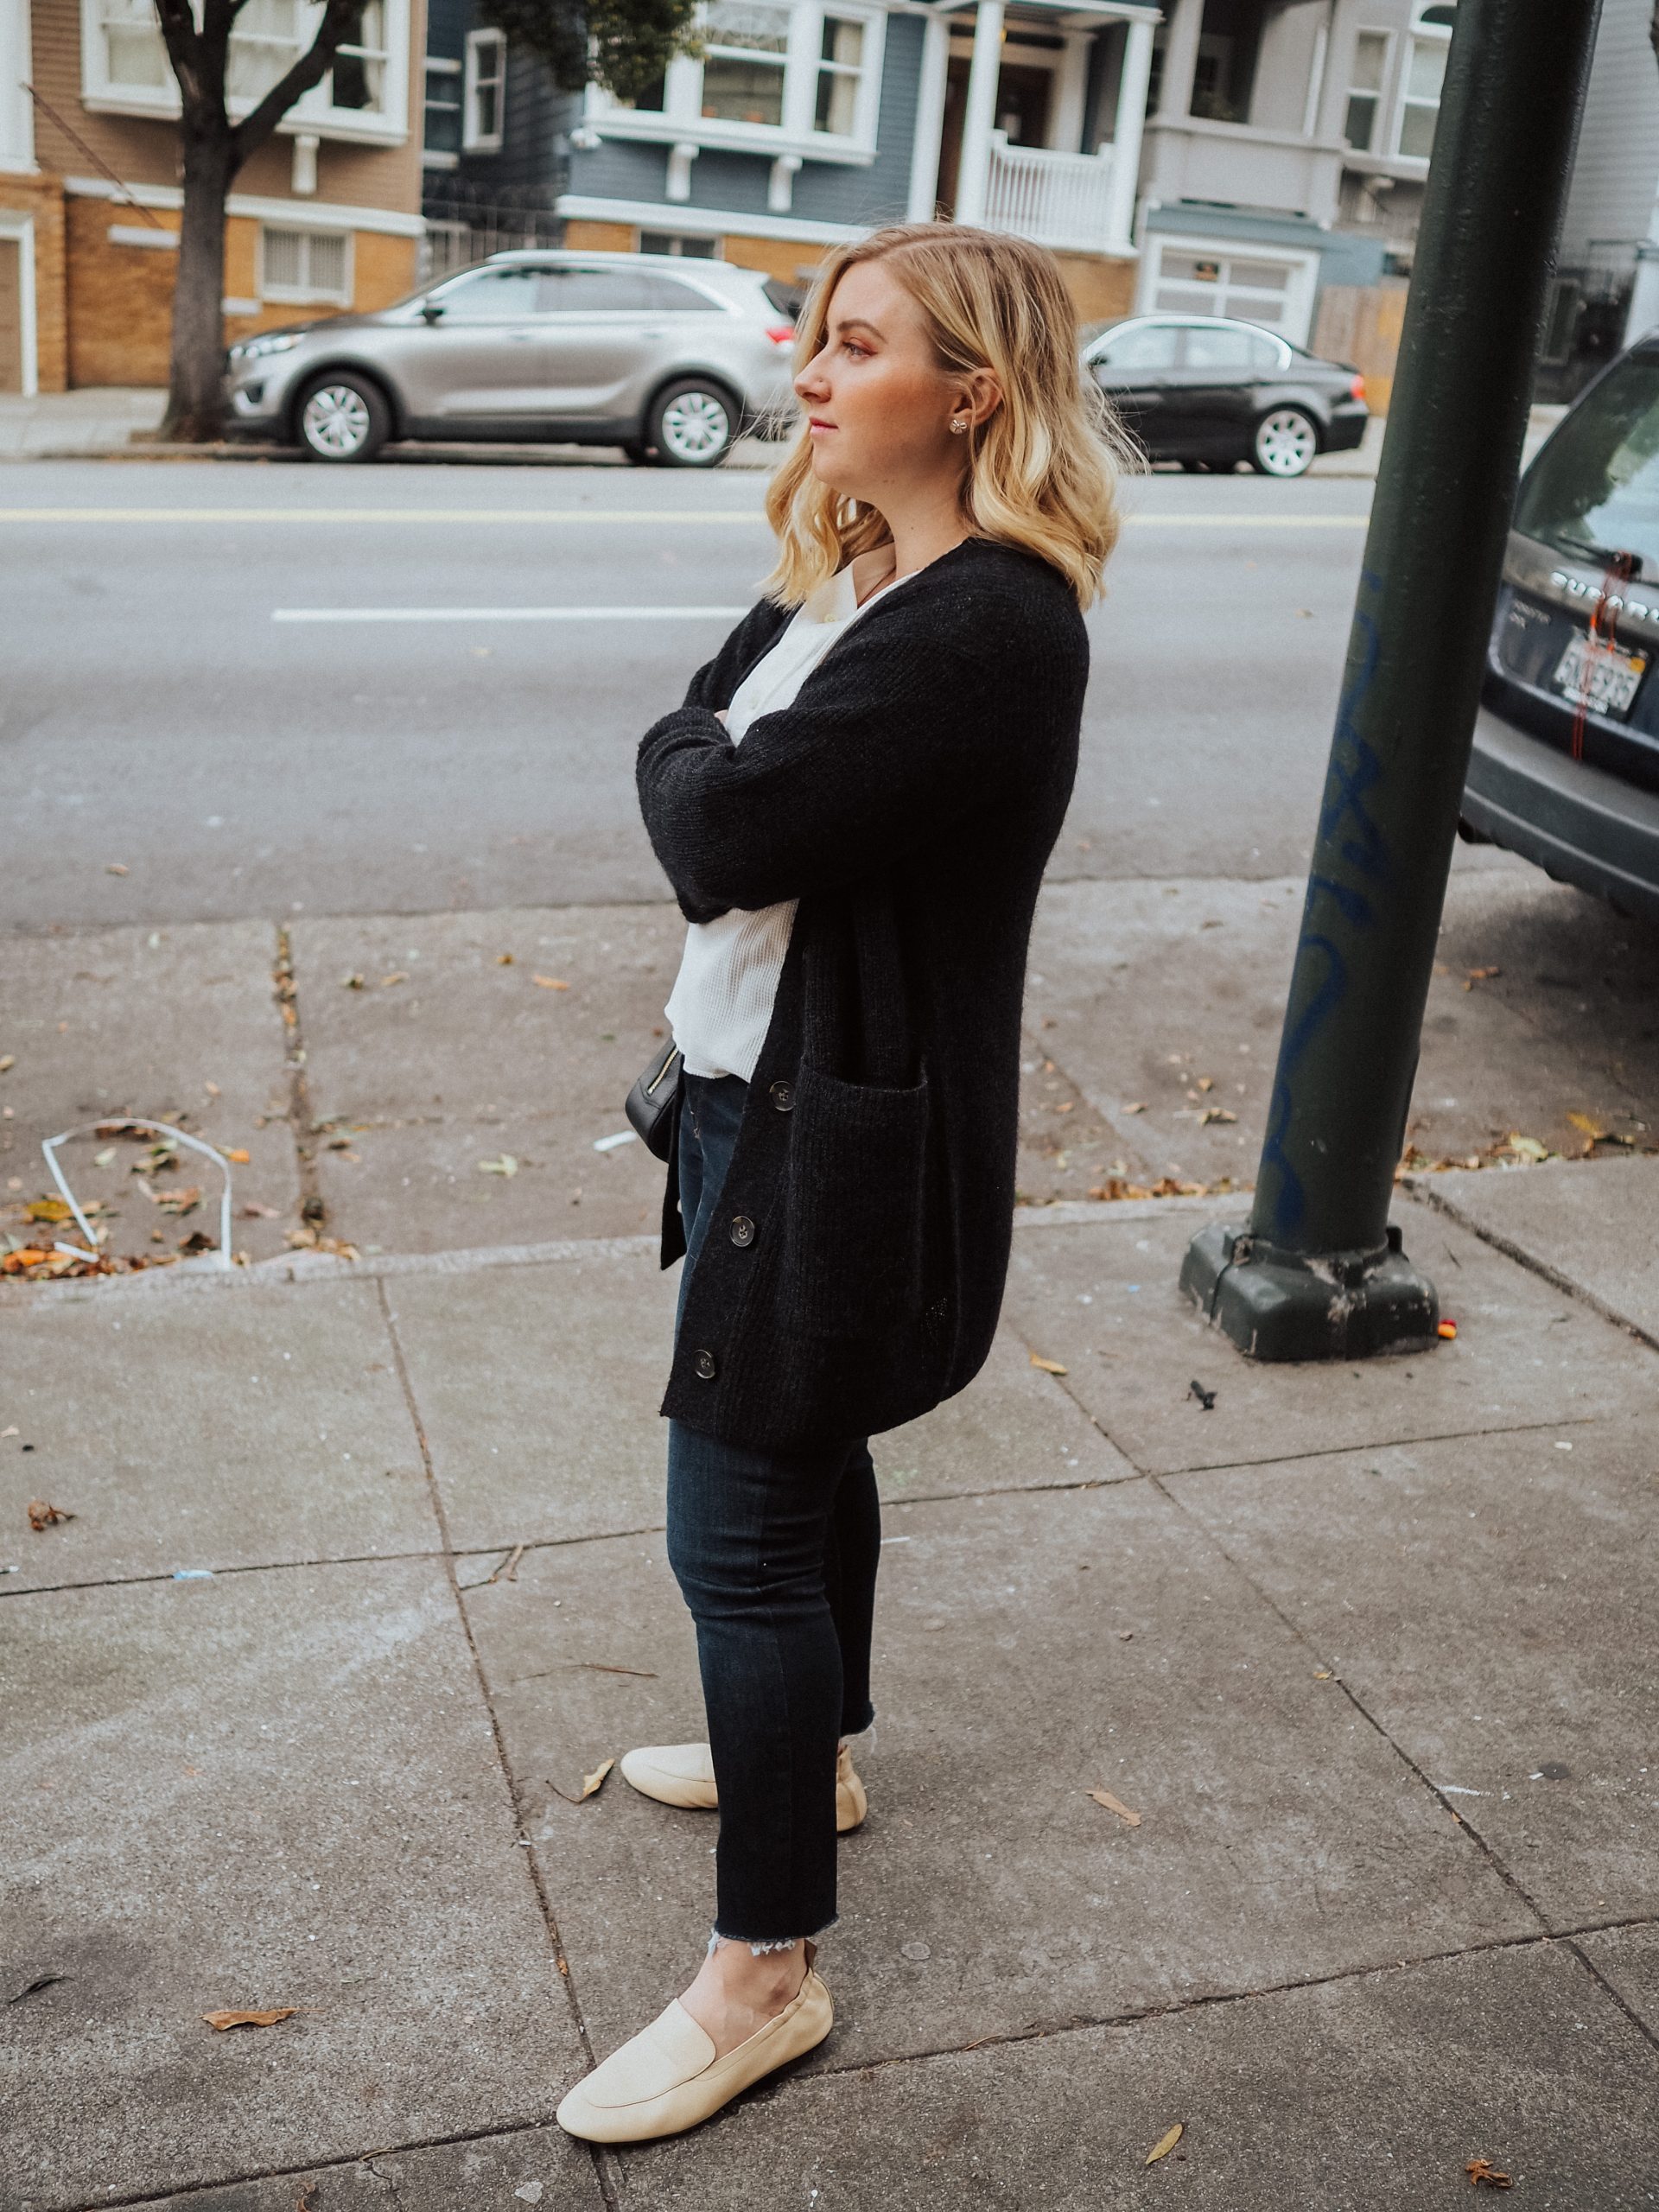 Everlane day loafer and alpaca cardigan outfit